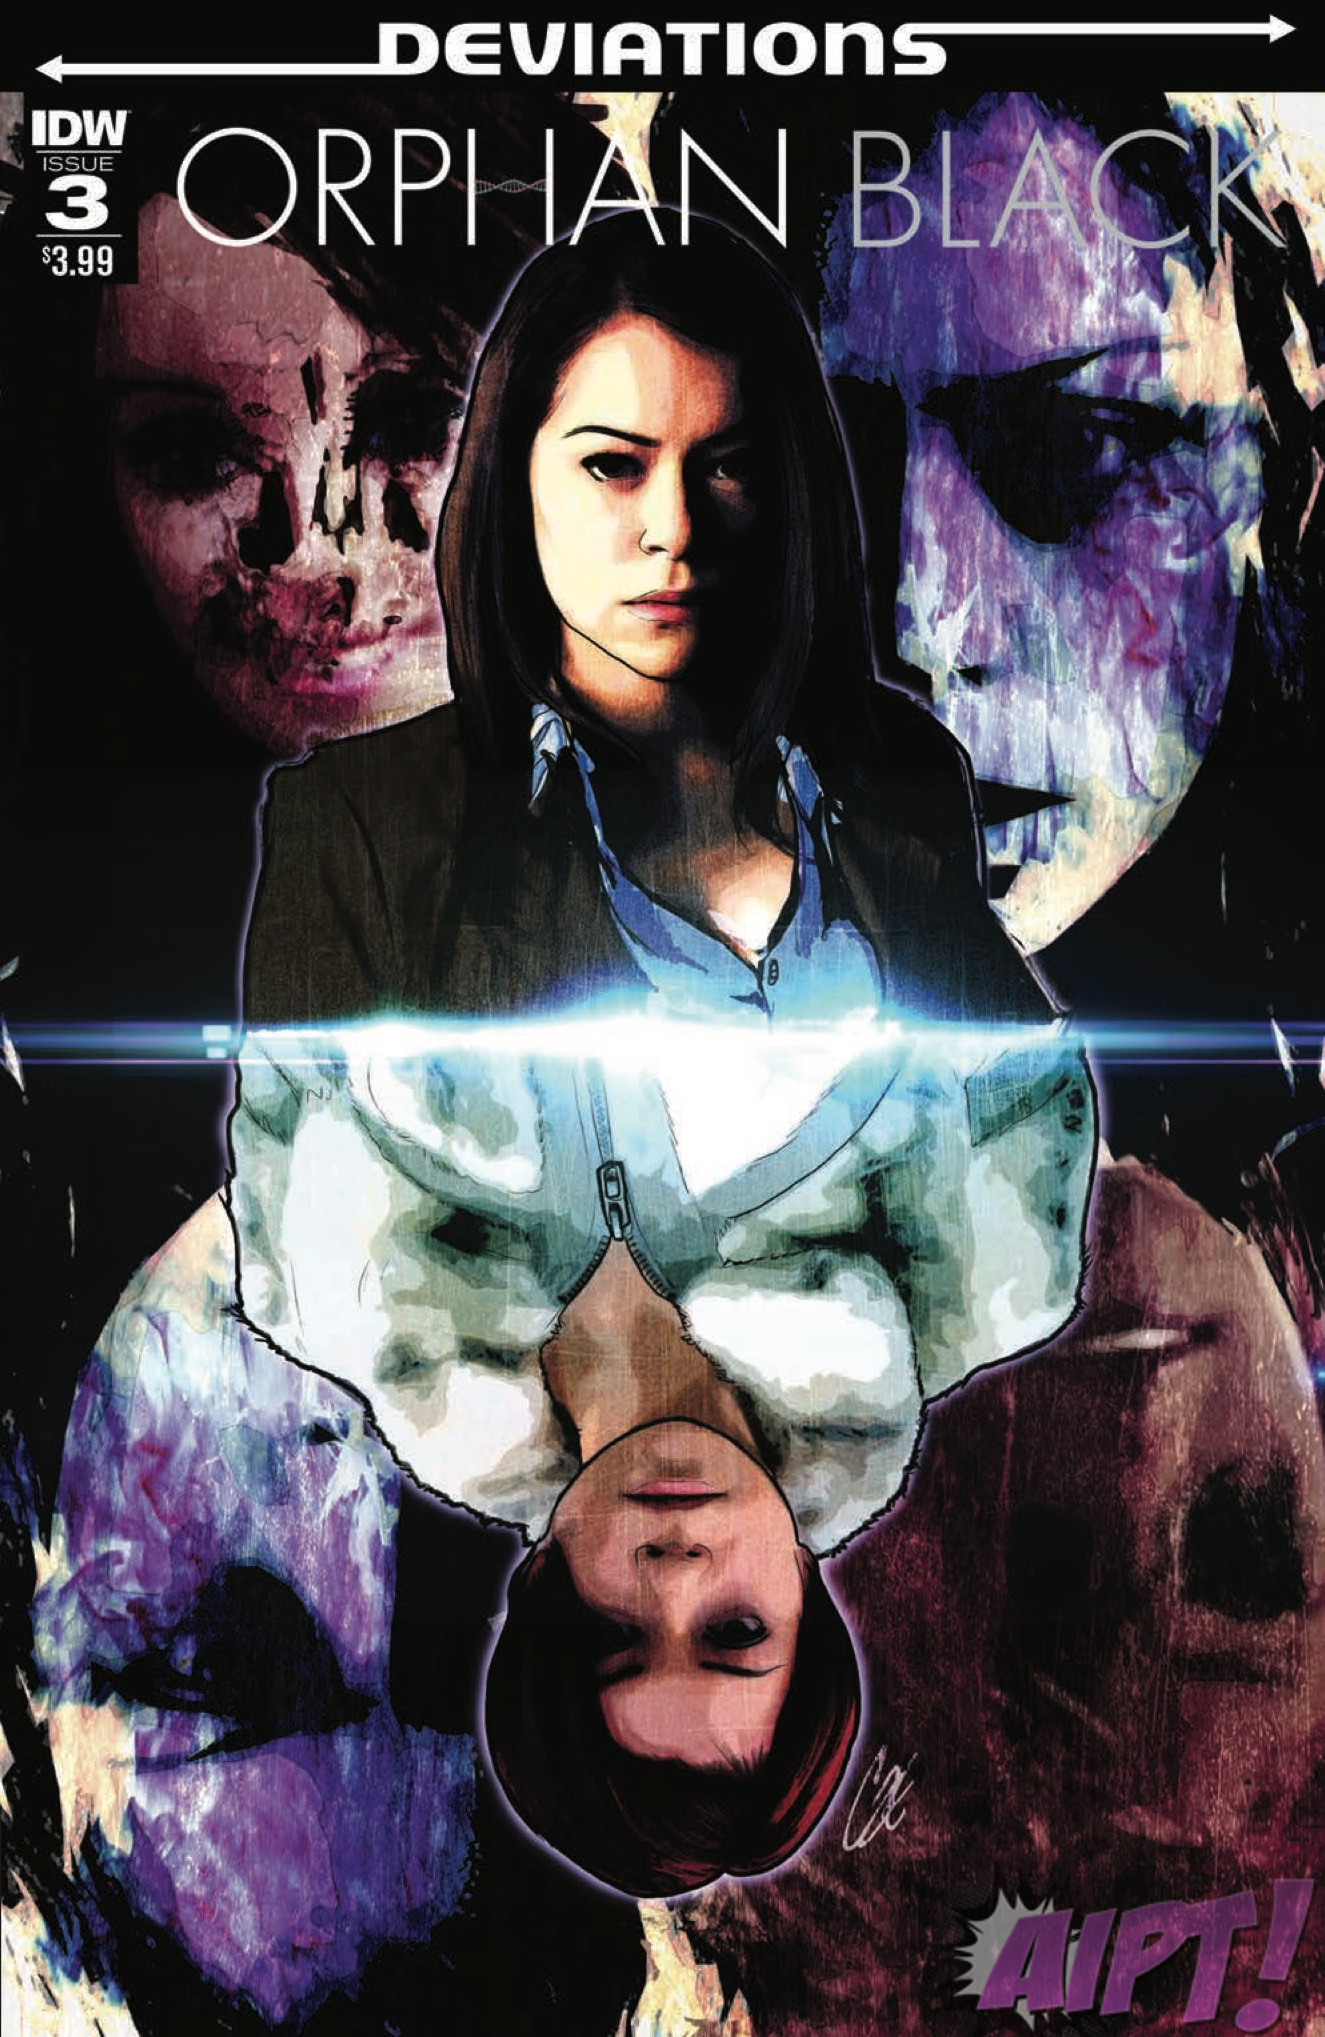 [EXCLUSIVE] IDW Preview: Orphan Black: Deviations #3